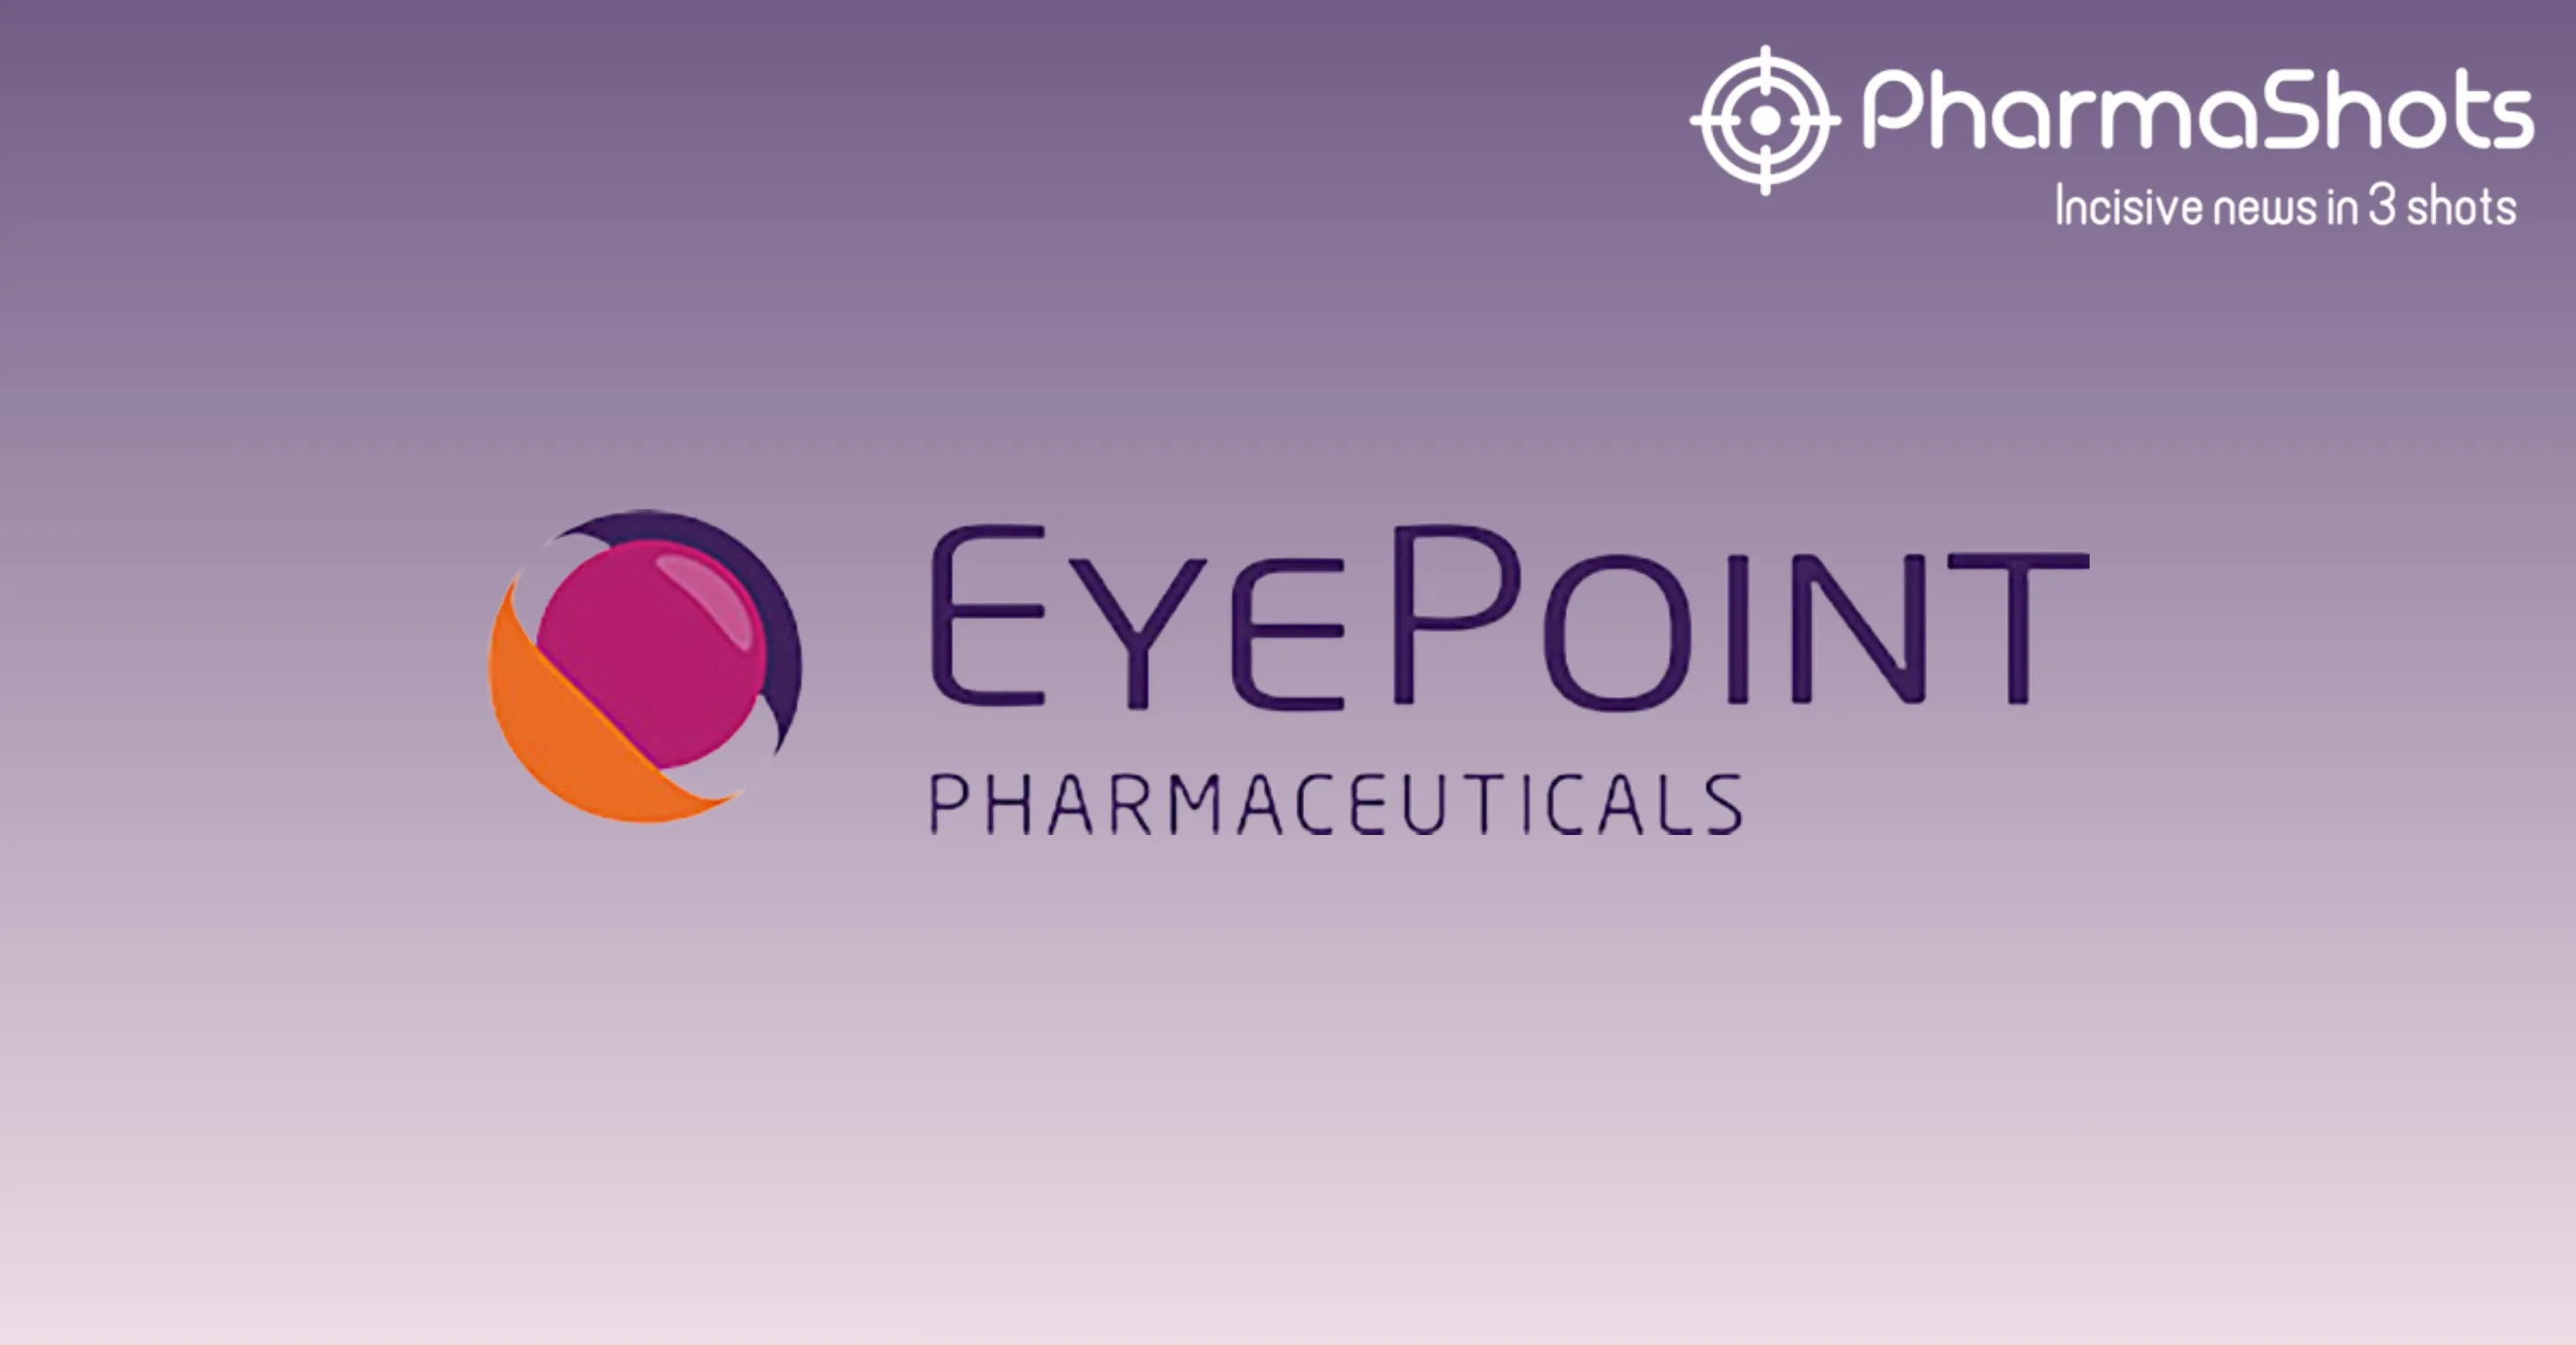 EyePoint Pharmaceuticals Reports Results for EYP-1901 in P-II Trial for the Treatment of Wet Age-Related Macular Degeneration